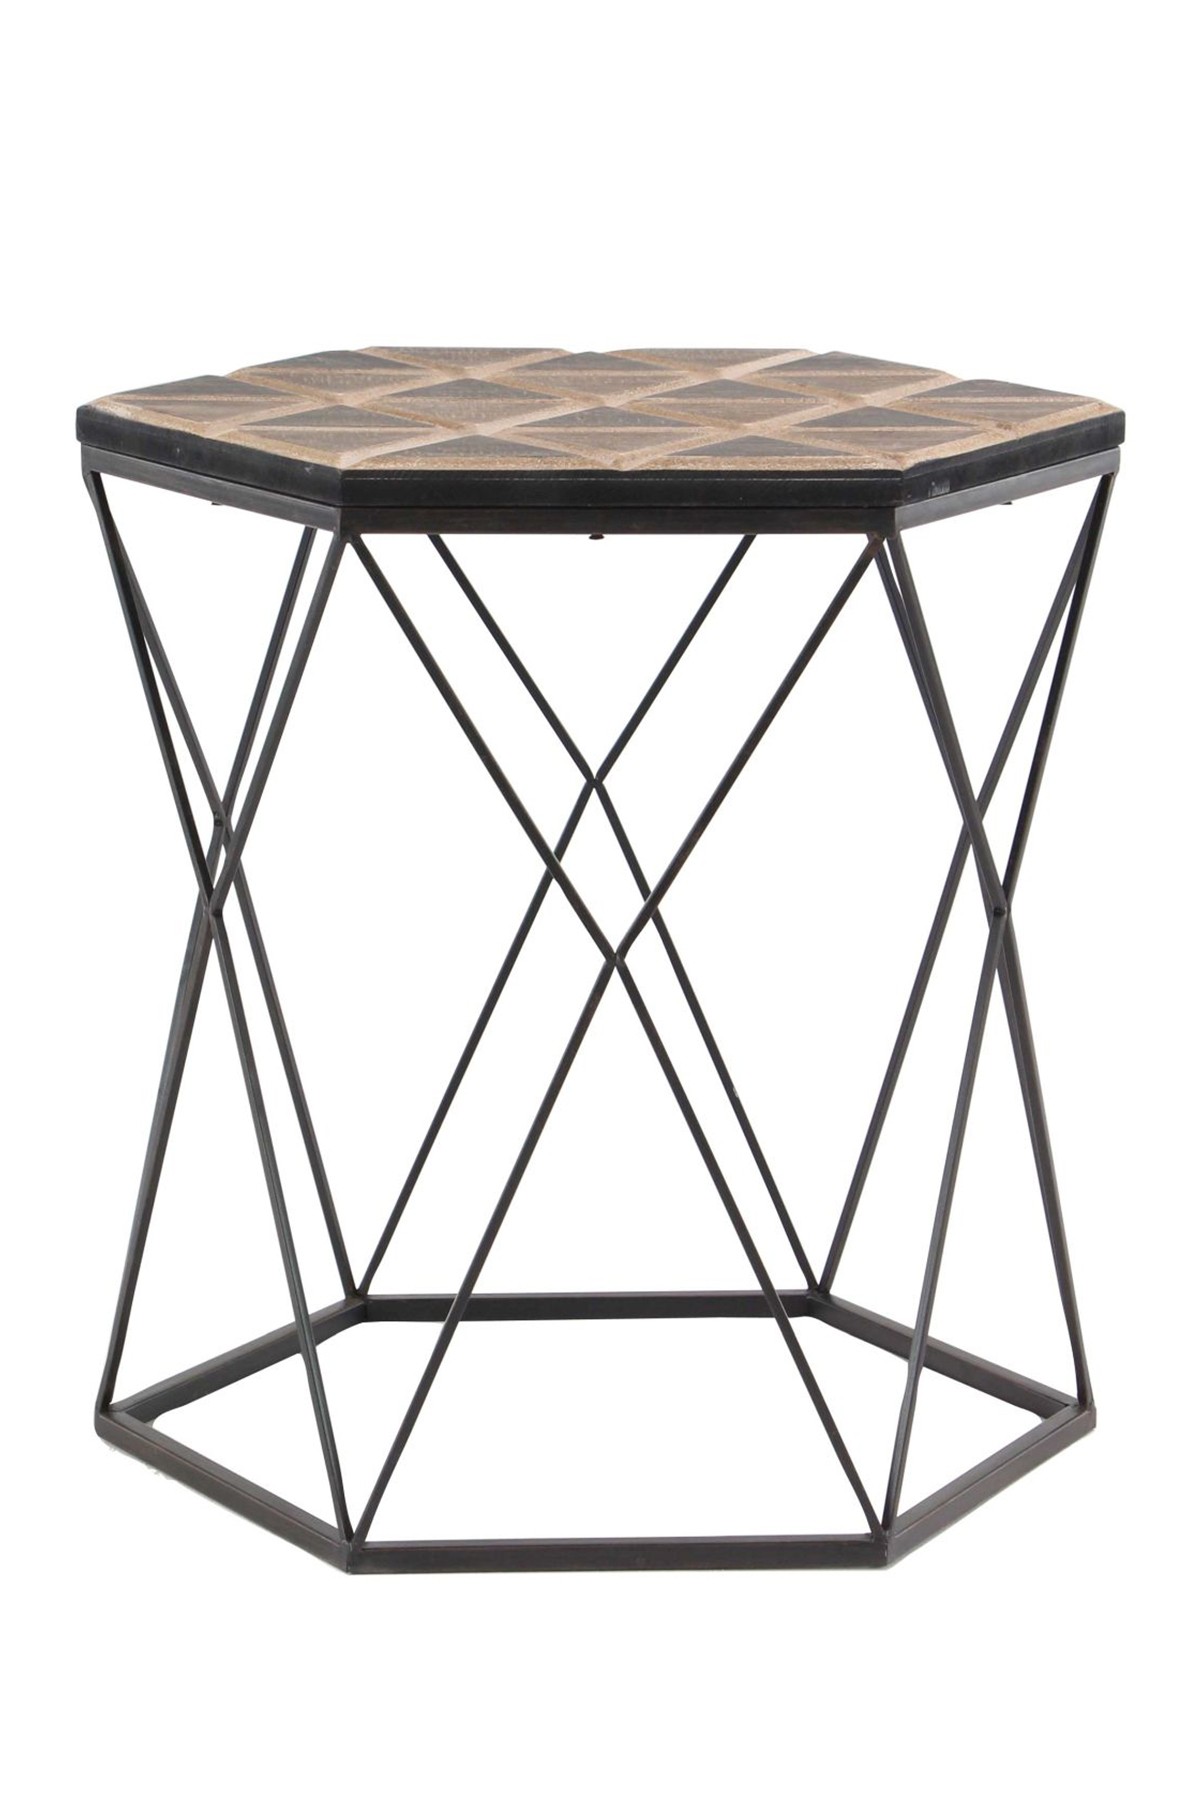 uma brown gray metal wood accent table nordstrom rack battery operated outdoor lamps tiffany lily lamp small wicker chair entrance console modern sofa mosaic set round entry